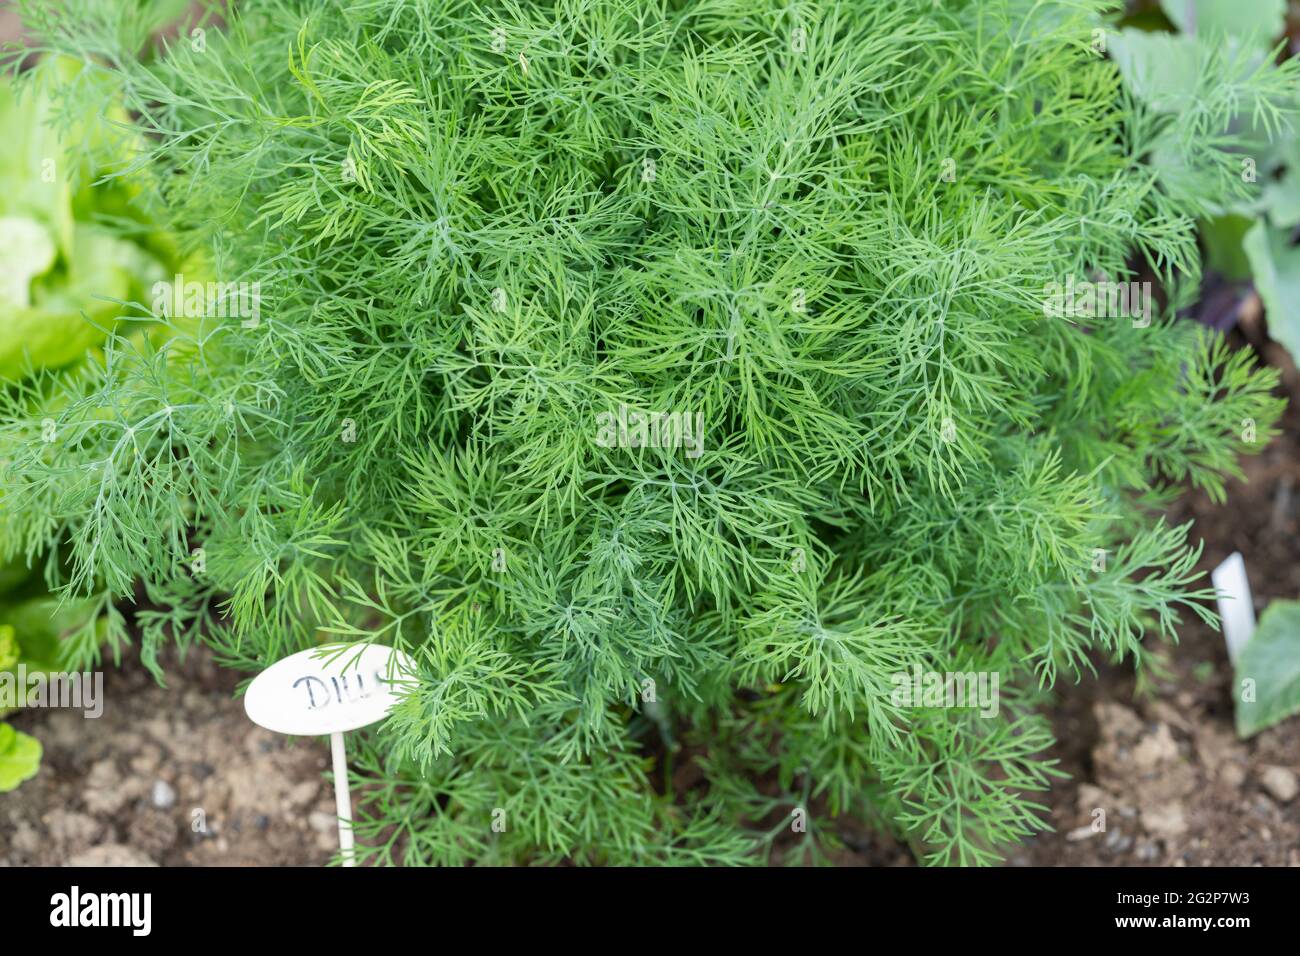 Dill (Anethum graveolens) is an annual herb in the celery family Apiaceae. It is the only species in the genus Anethum. Growing in a herb garden Stock Photo